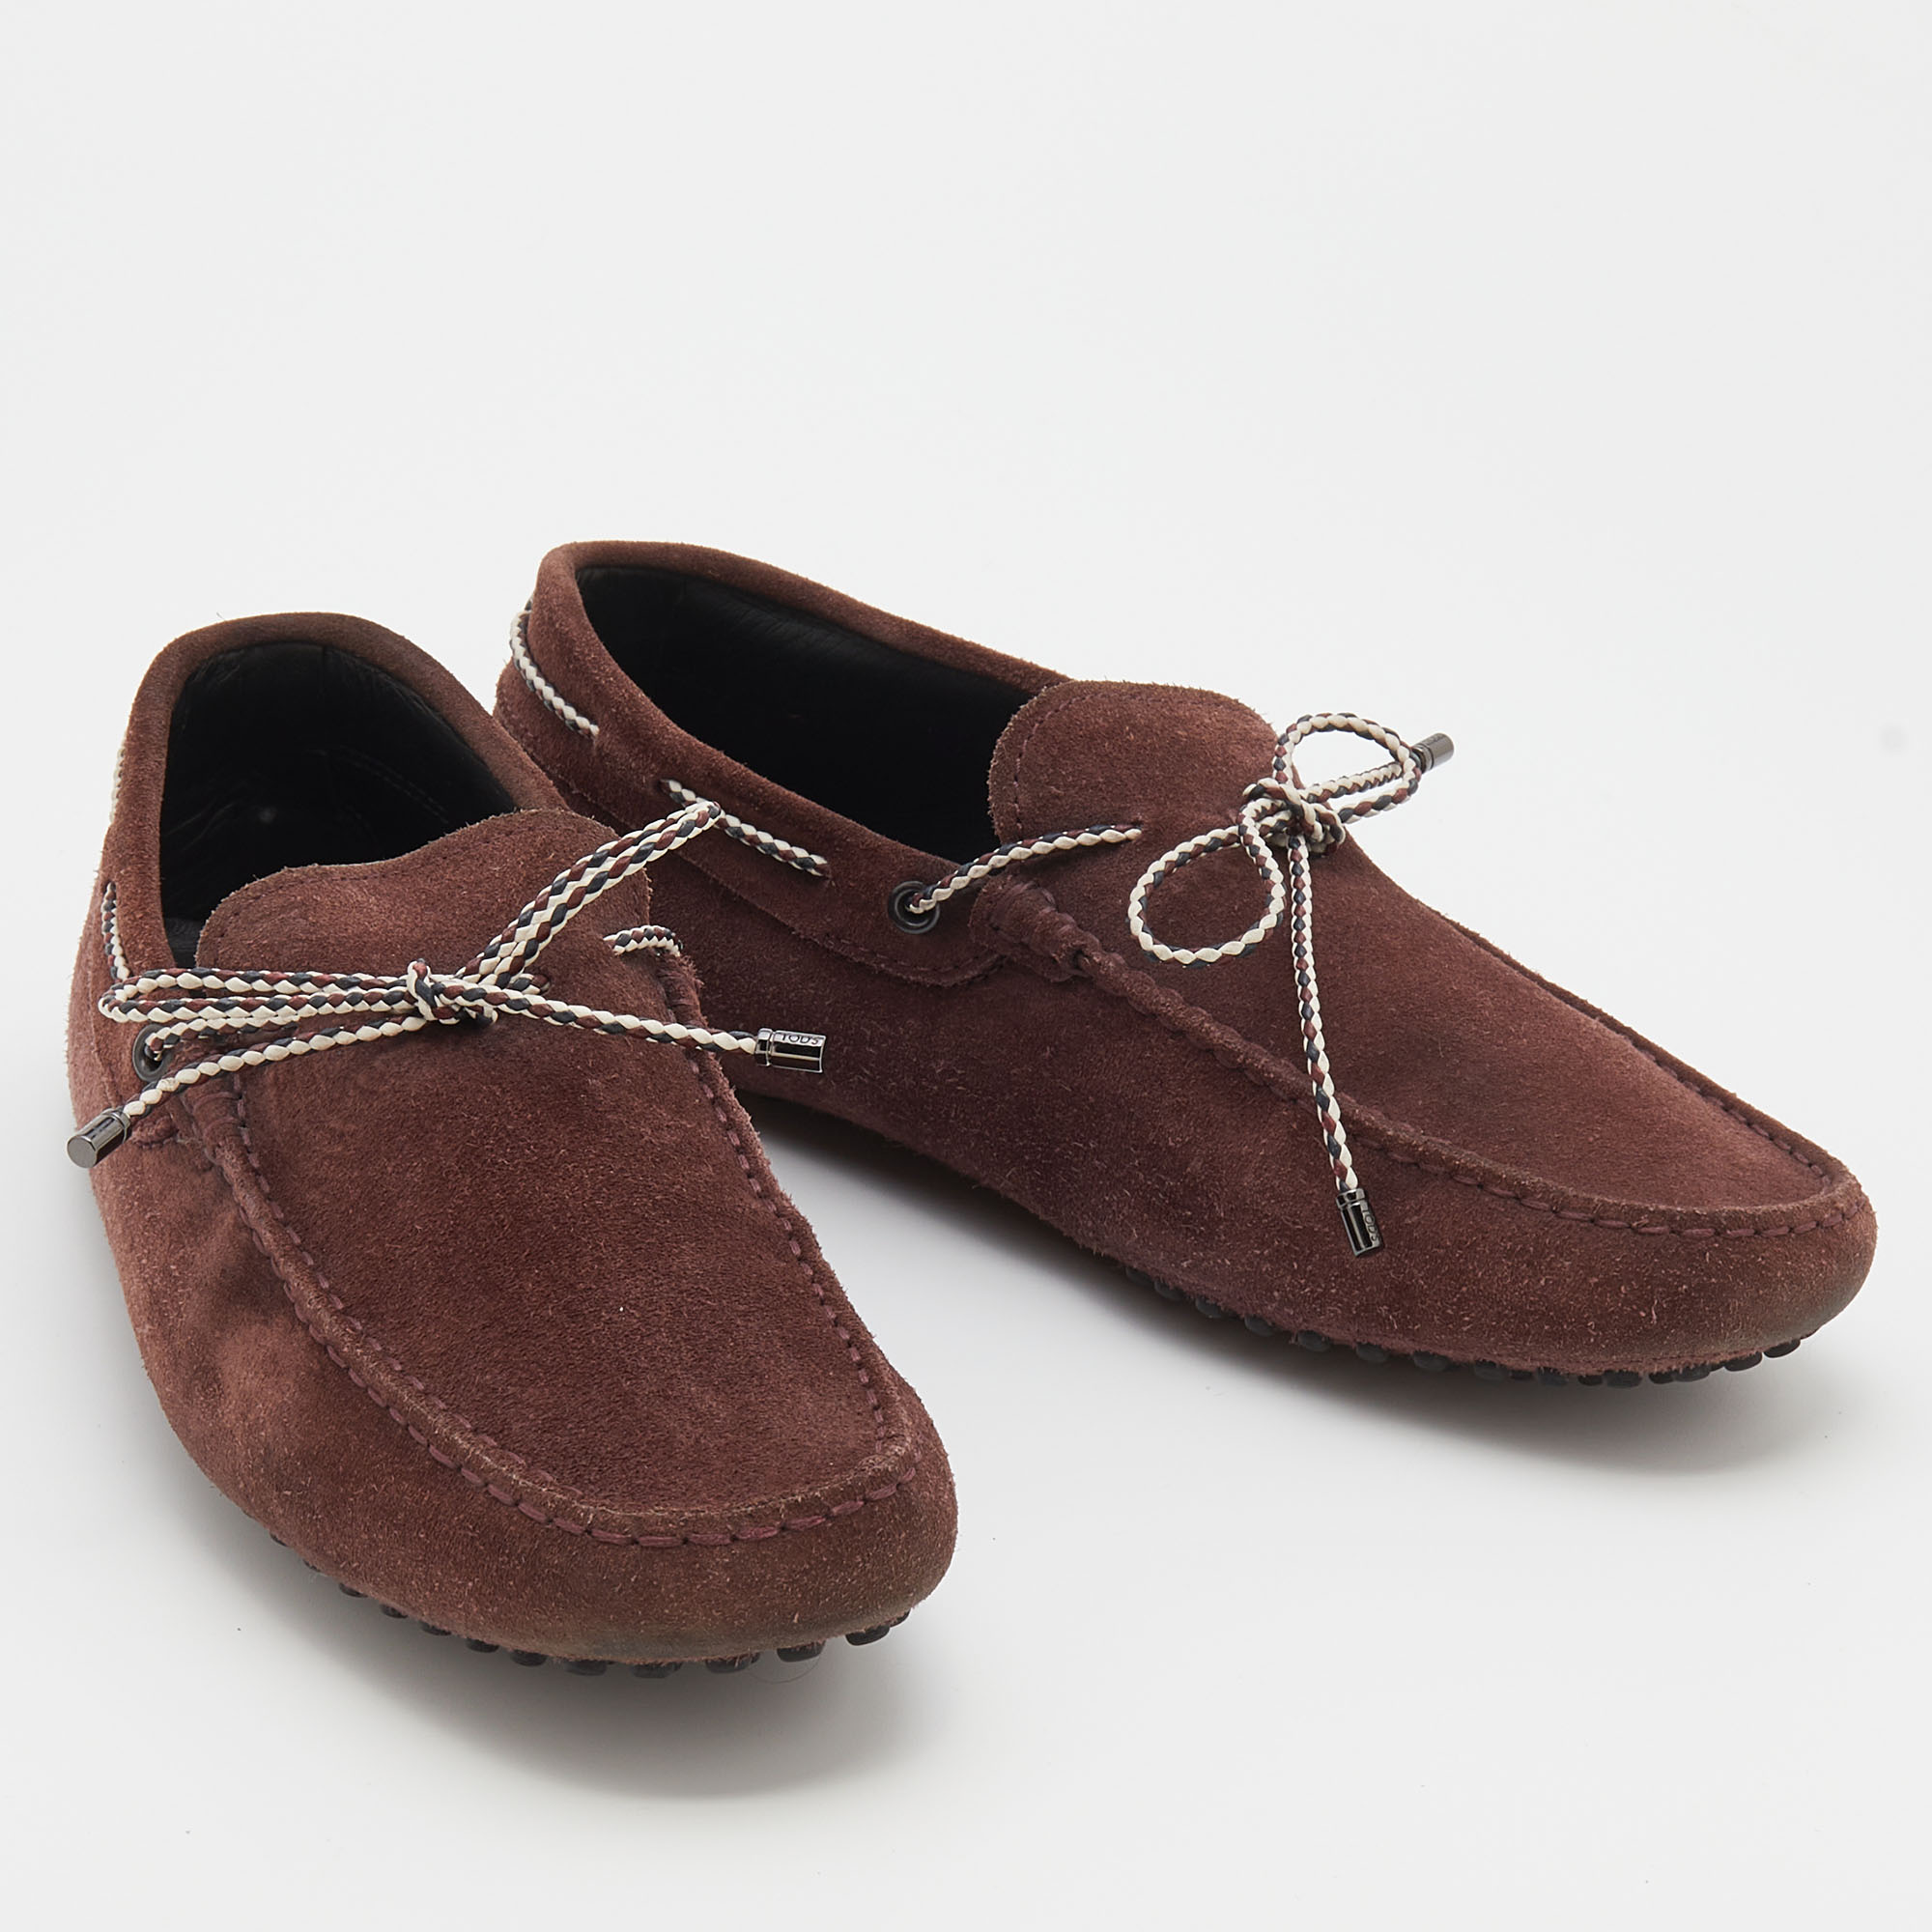 Tod's Burgundy Suede Bow Slip On Loafers Size 42